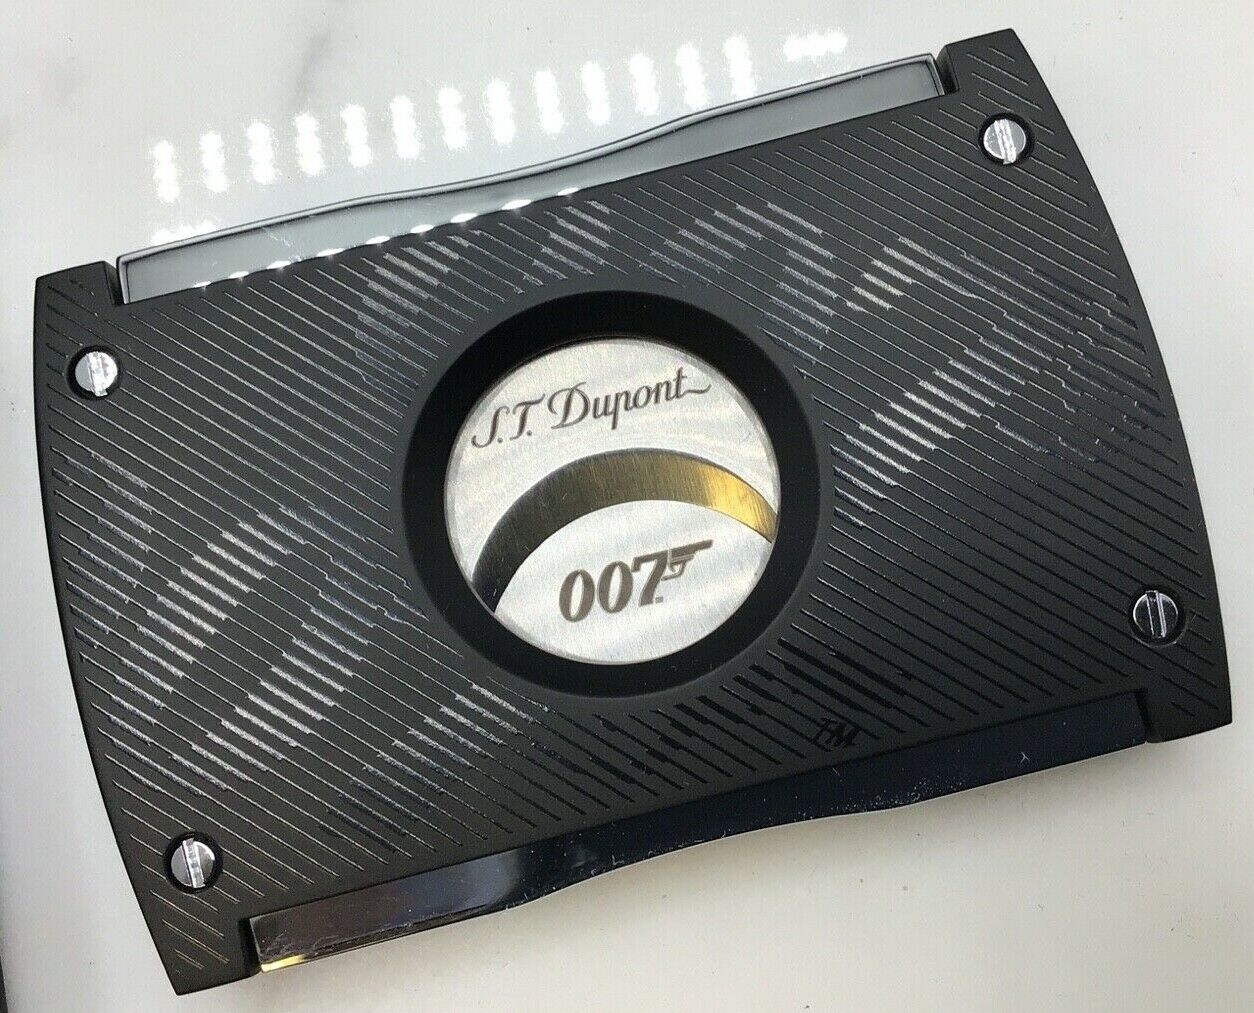 ST Dupont James Bond 007 Cigar Cutter Limited Edition Double Guillotine 003416